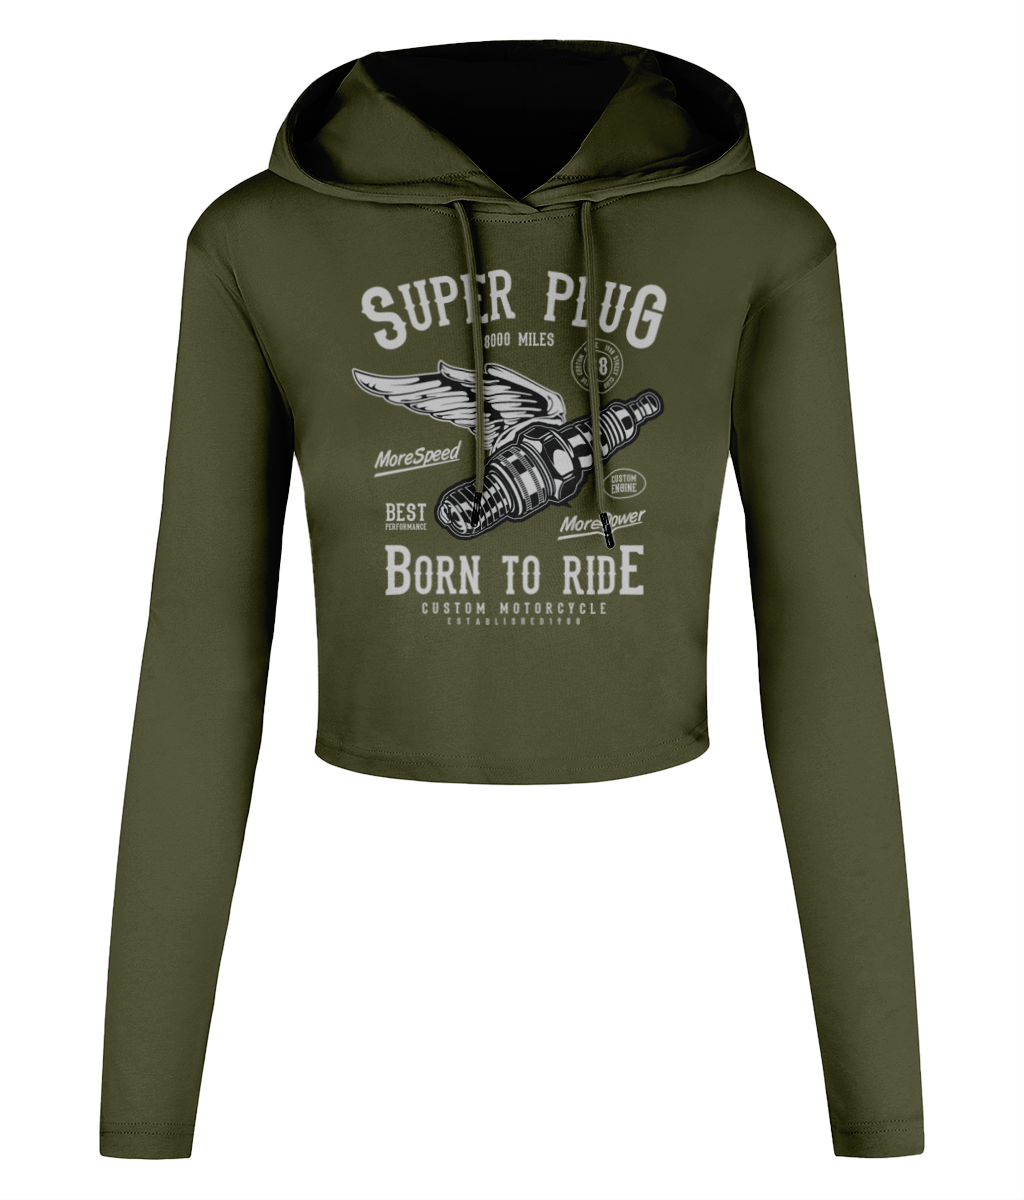 Super Plug – Women’s Cropped Hooded T-shirt